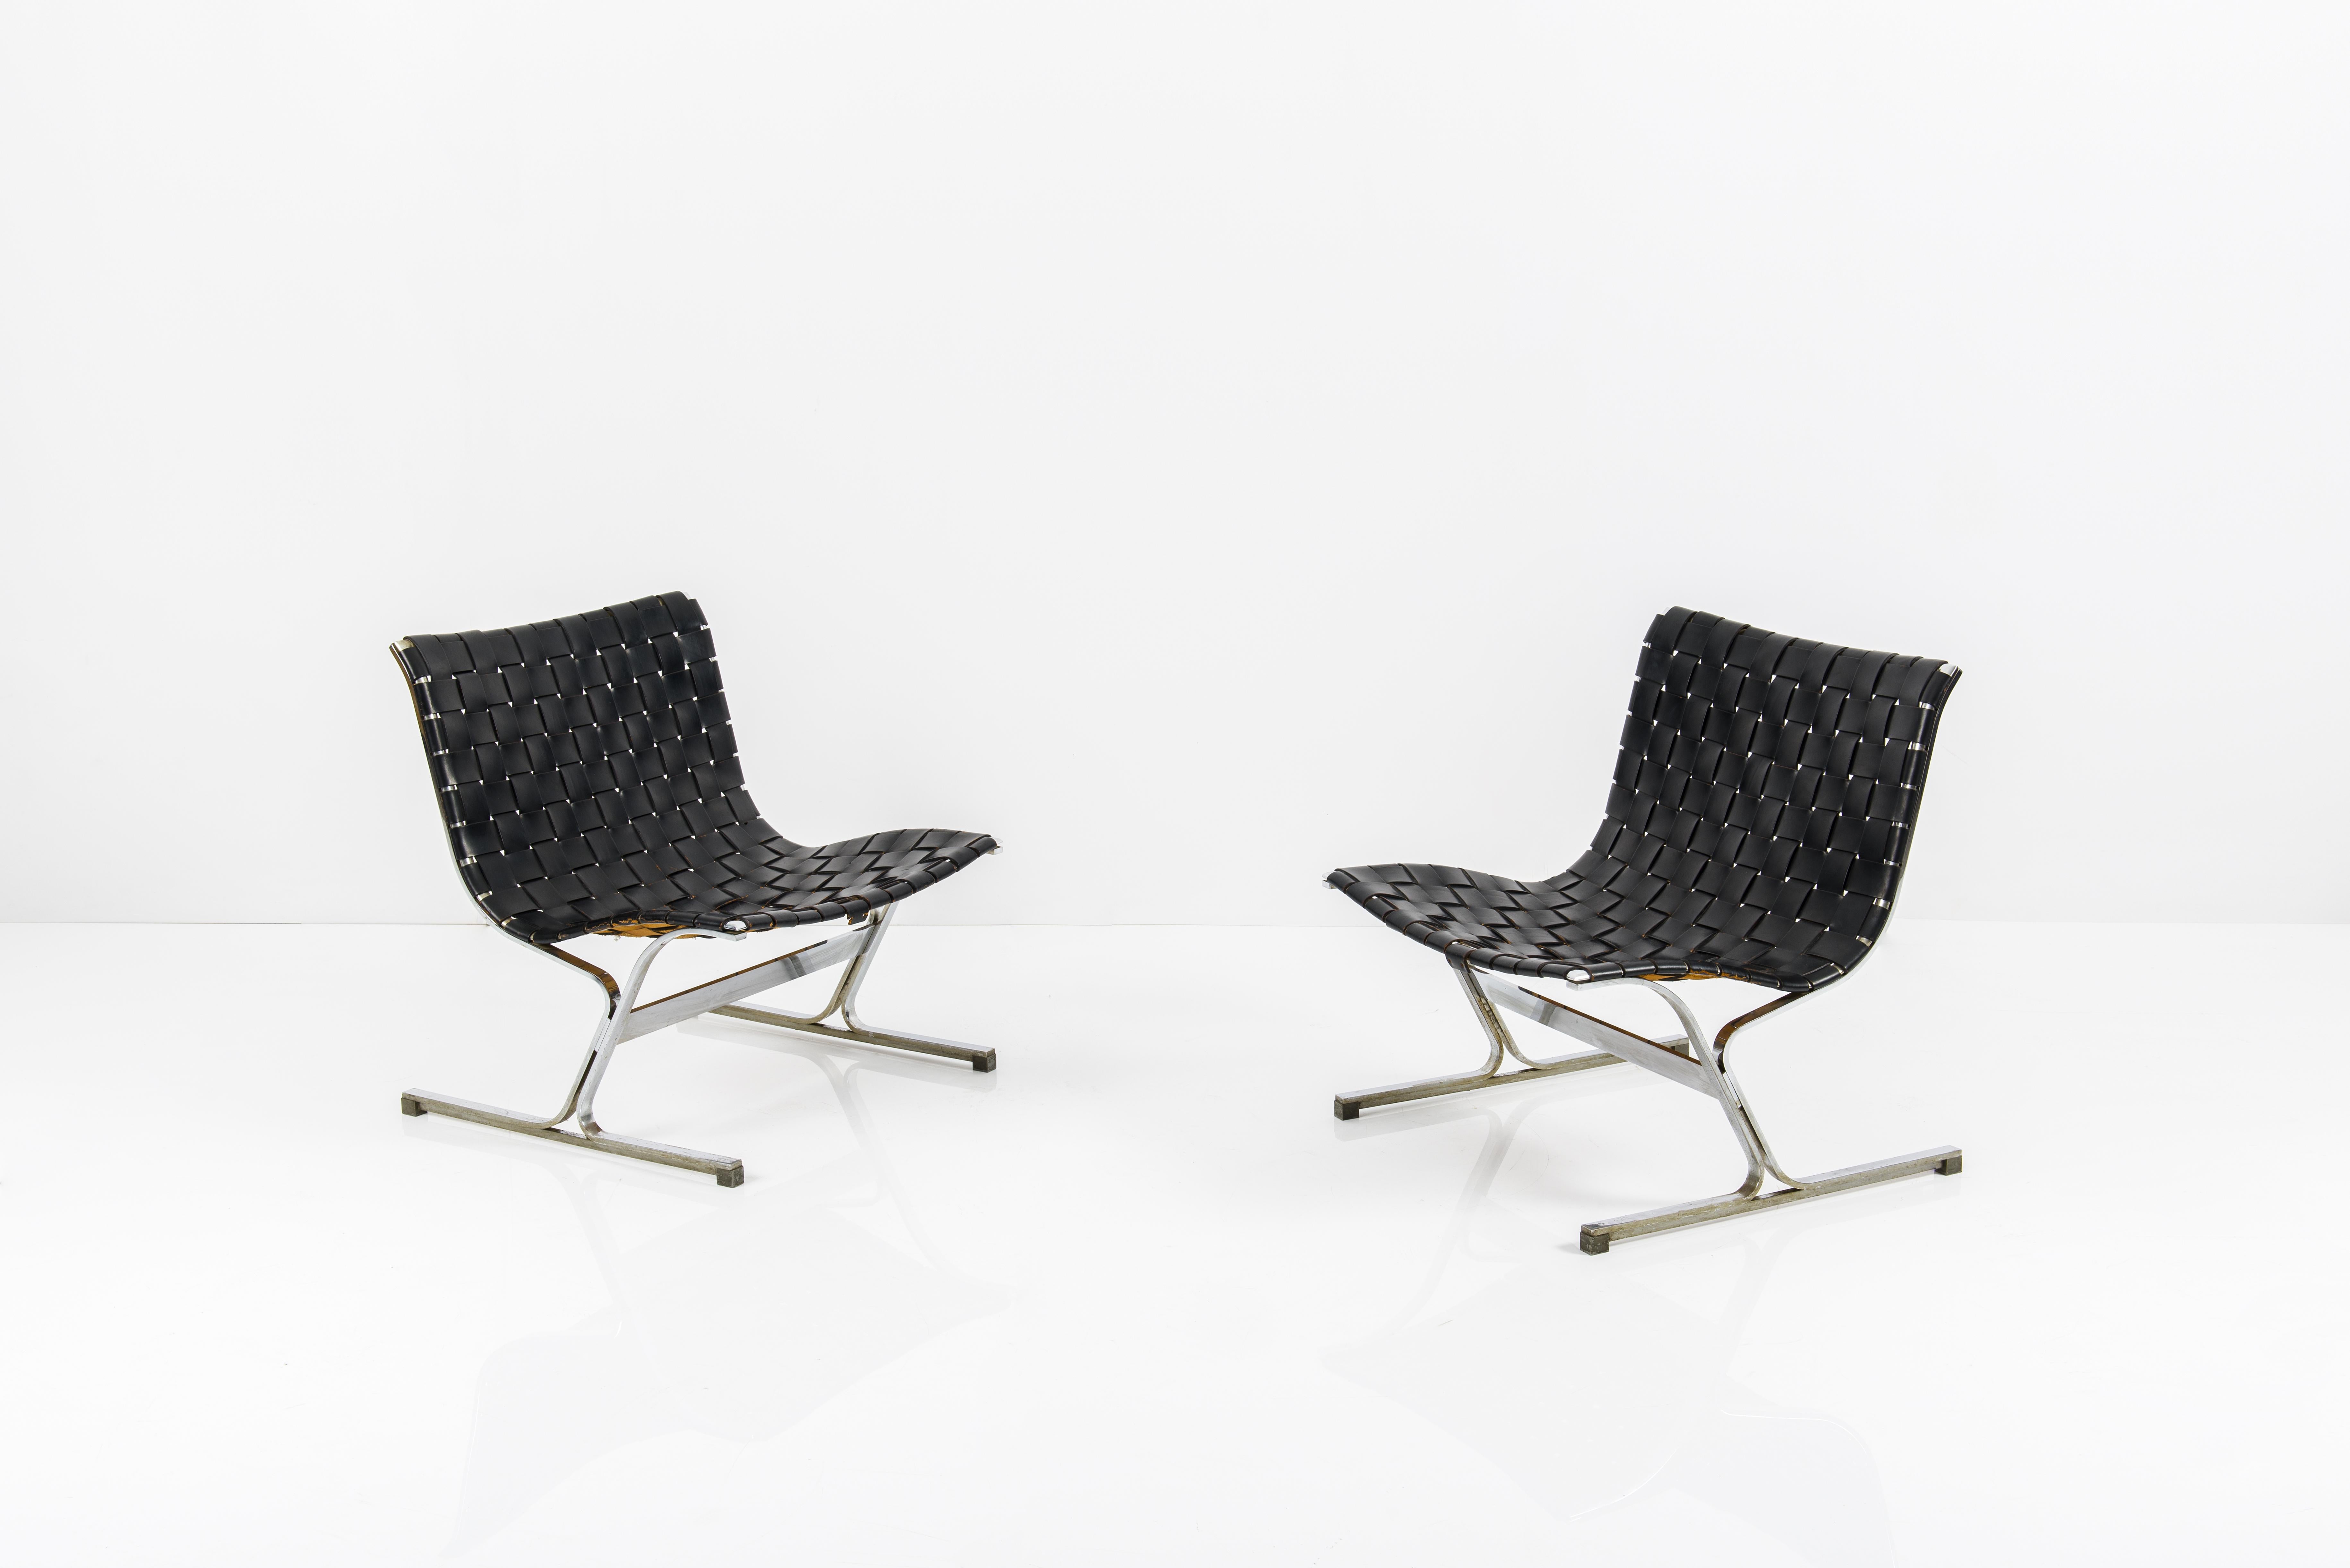 Pair of Luar lounge chairs designed by Ross Littel and manufactured by ICF De Padova, Italy, 1965.
Black stripes and chrome-plated solid metal frames
Great vintage condition and leather patina.
Excellent quality.